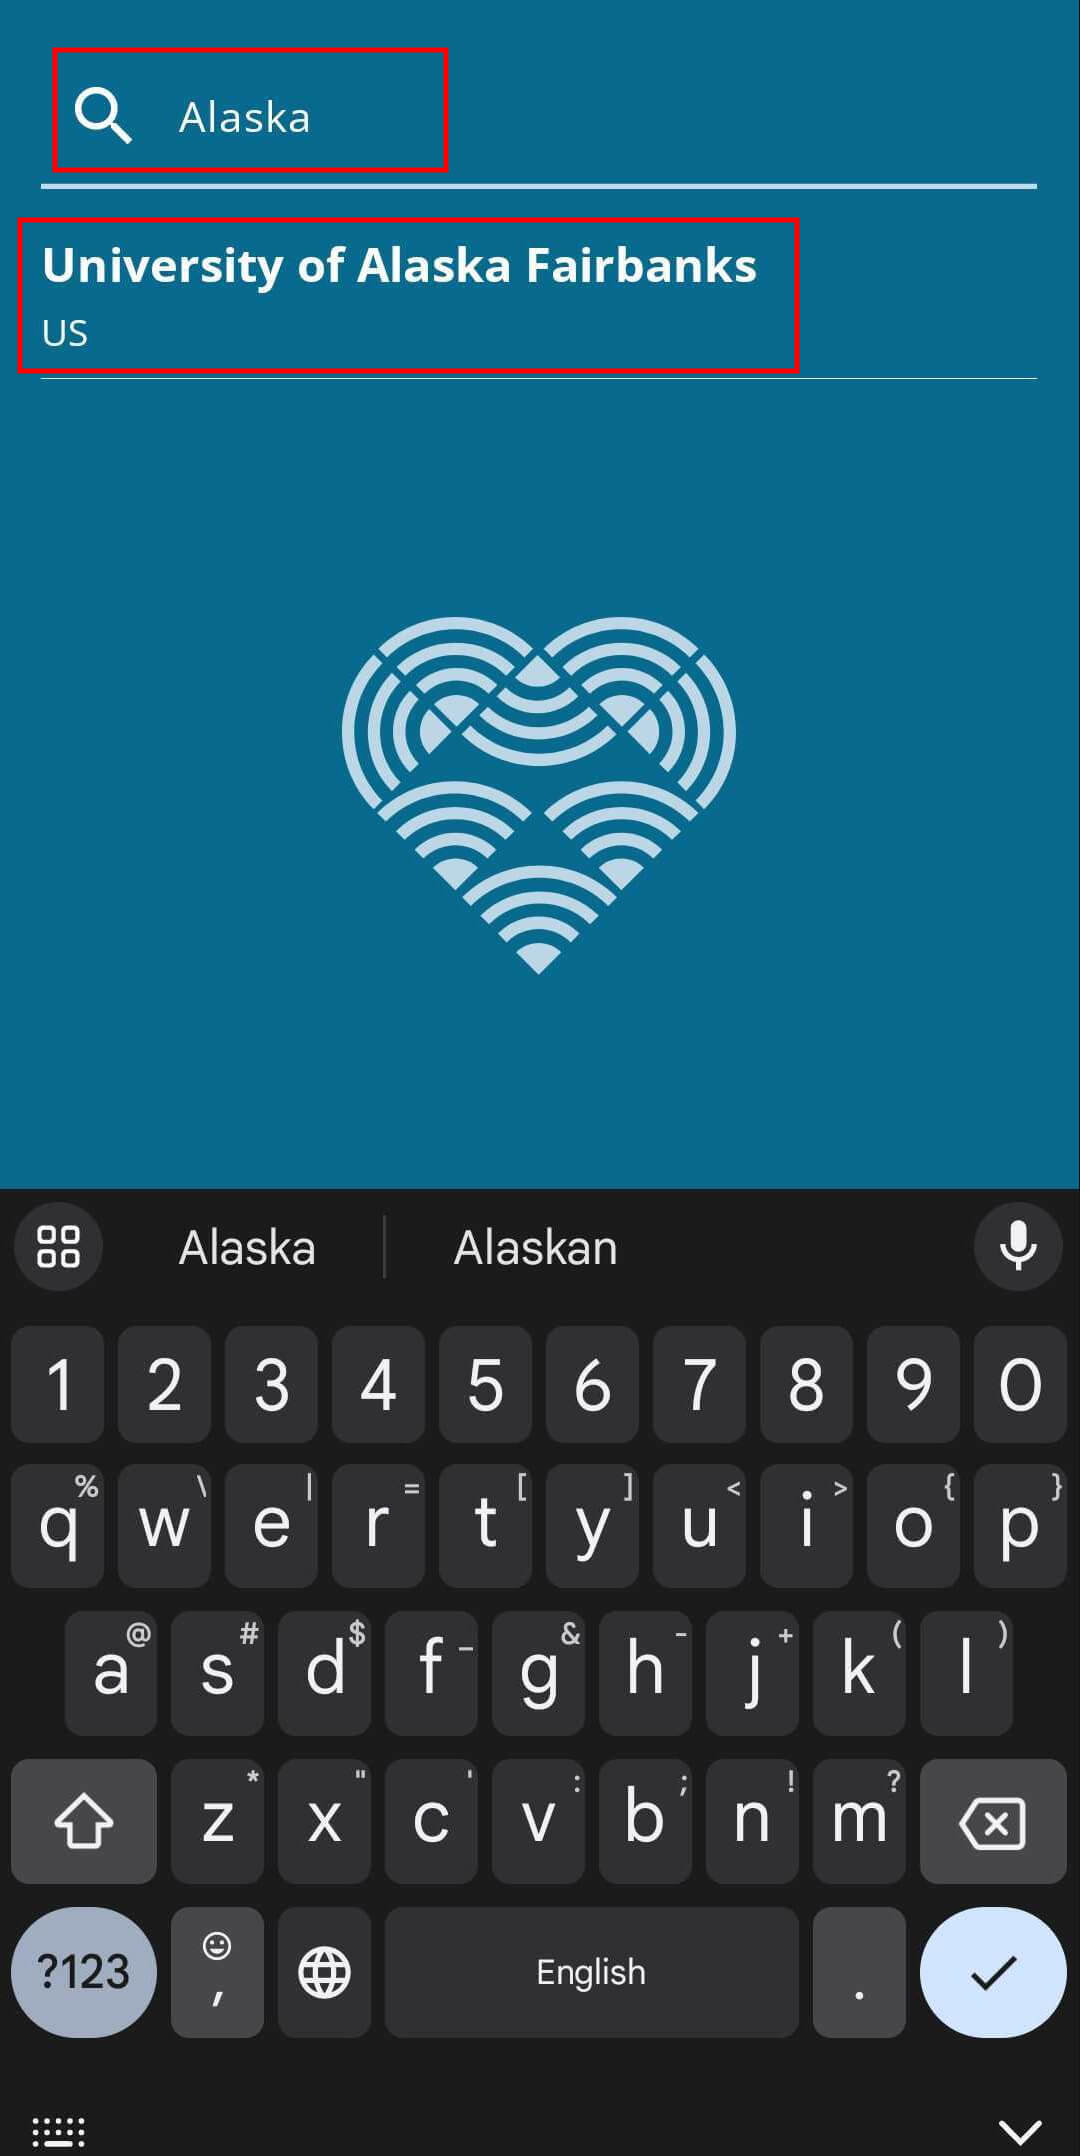 The geteduroam logo is in the center of the screen. A list of nearby configs is just above it, and the item in the list is the University of Alaska Fairbanks. "Alaska" is typed in a search bar at the very top of the screen, and a keyboard is visible at the bottom.